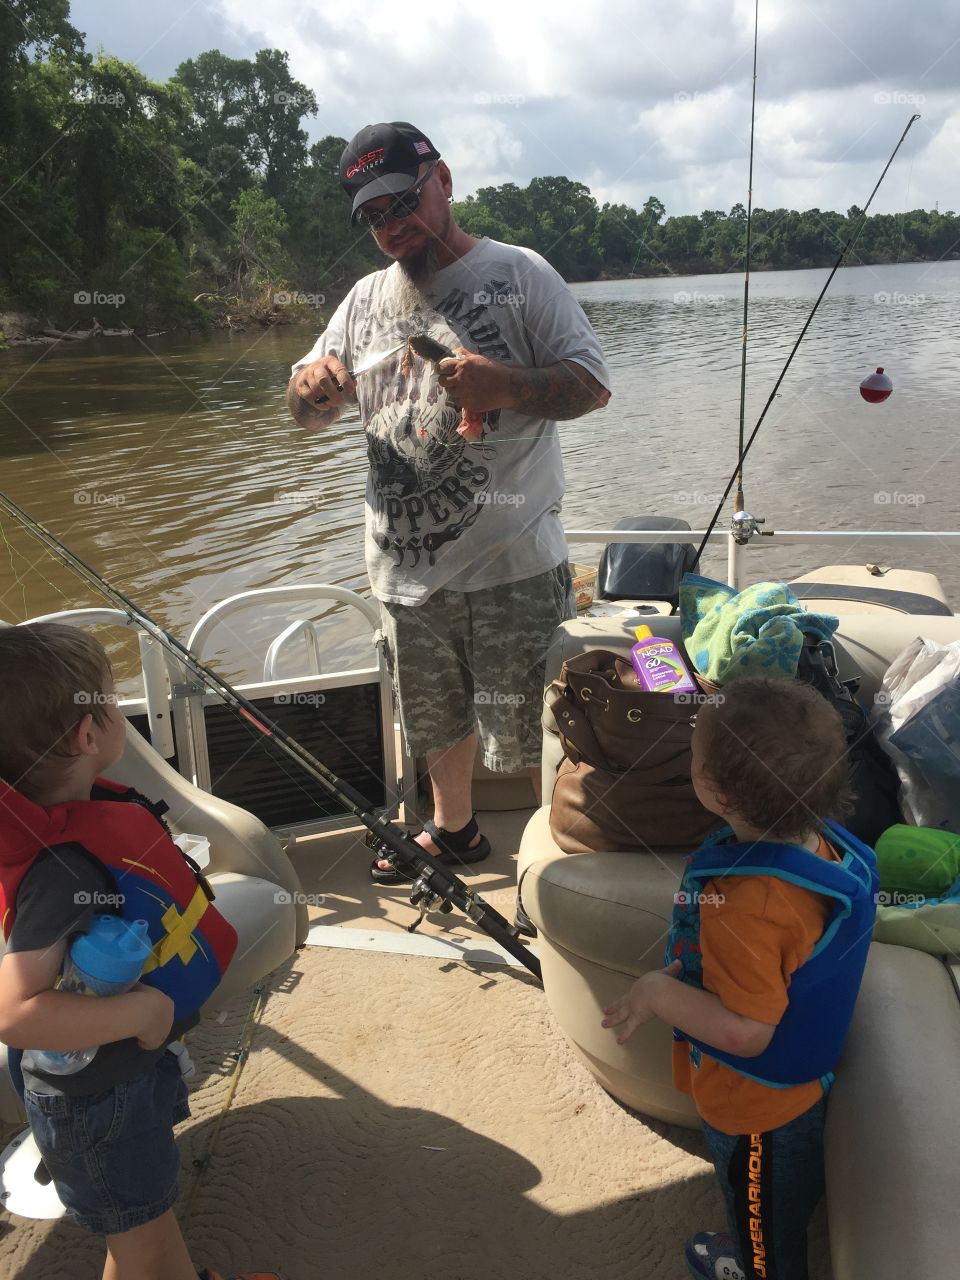 Pawpaw showing the boys how to fish on the boat. They caught a little fish and had to put back in the water. We were at San Jacinto River in Houston Texas 